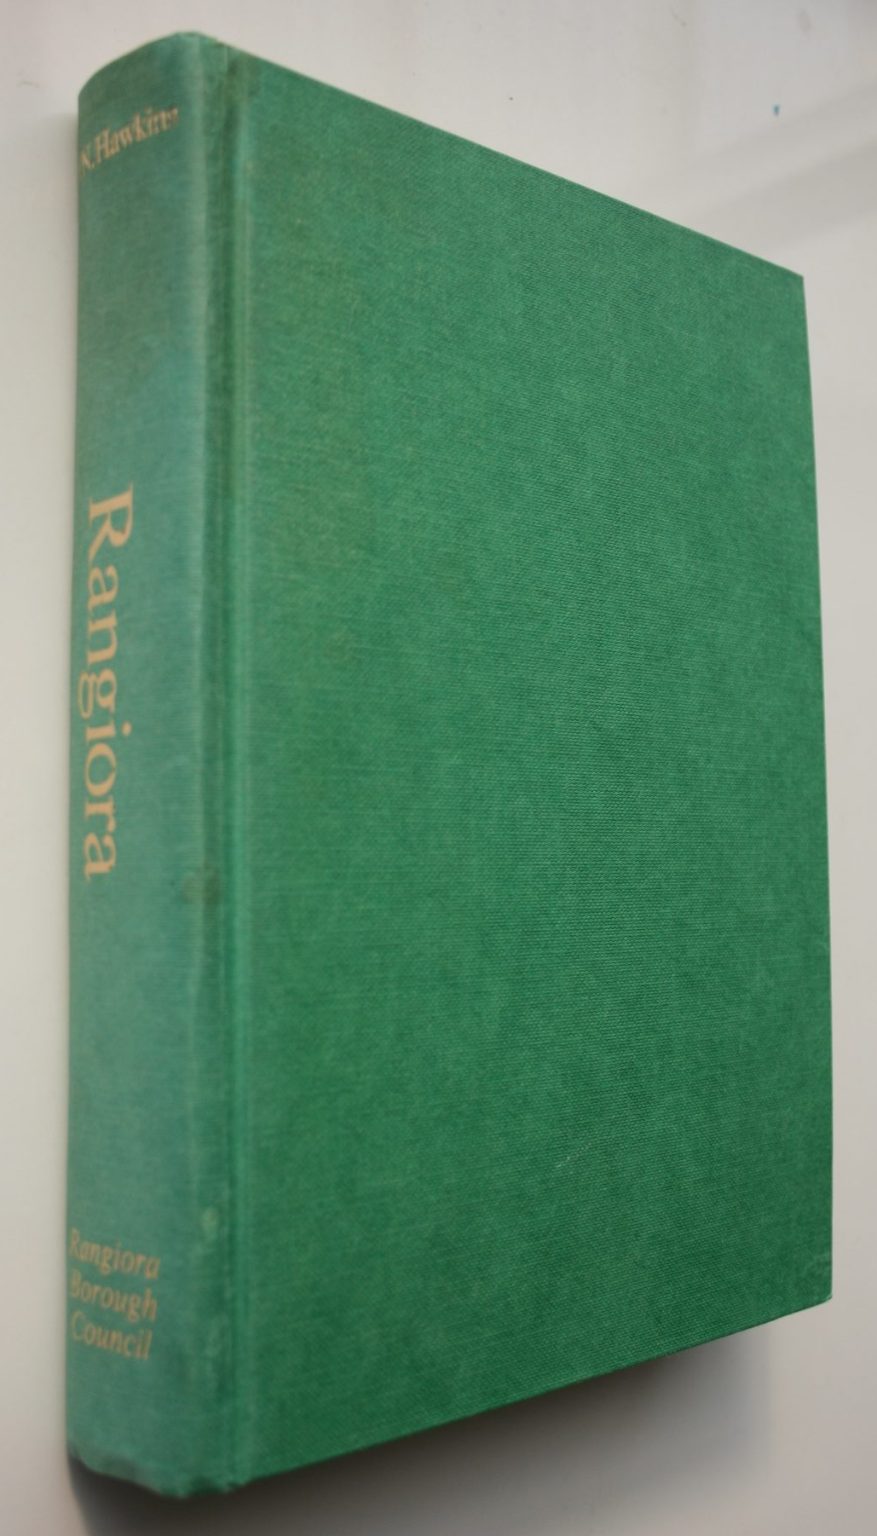 Rangiora: The Passing Years and People in a Canterbury Country Town by D. N. Hawkins. SCARCE, SIGNED BY AUTHOR.